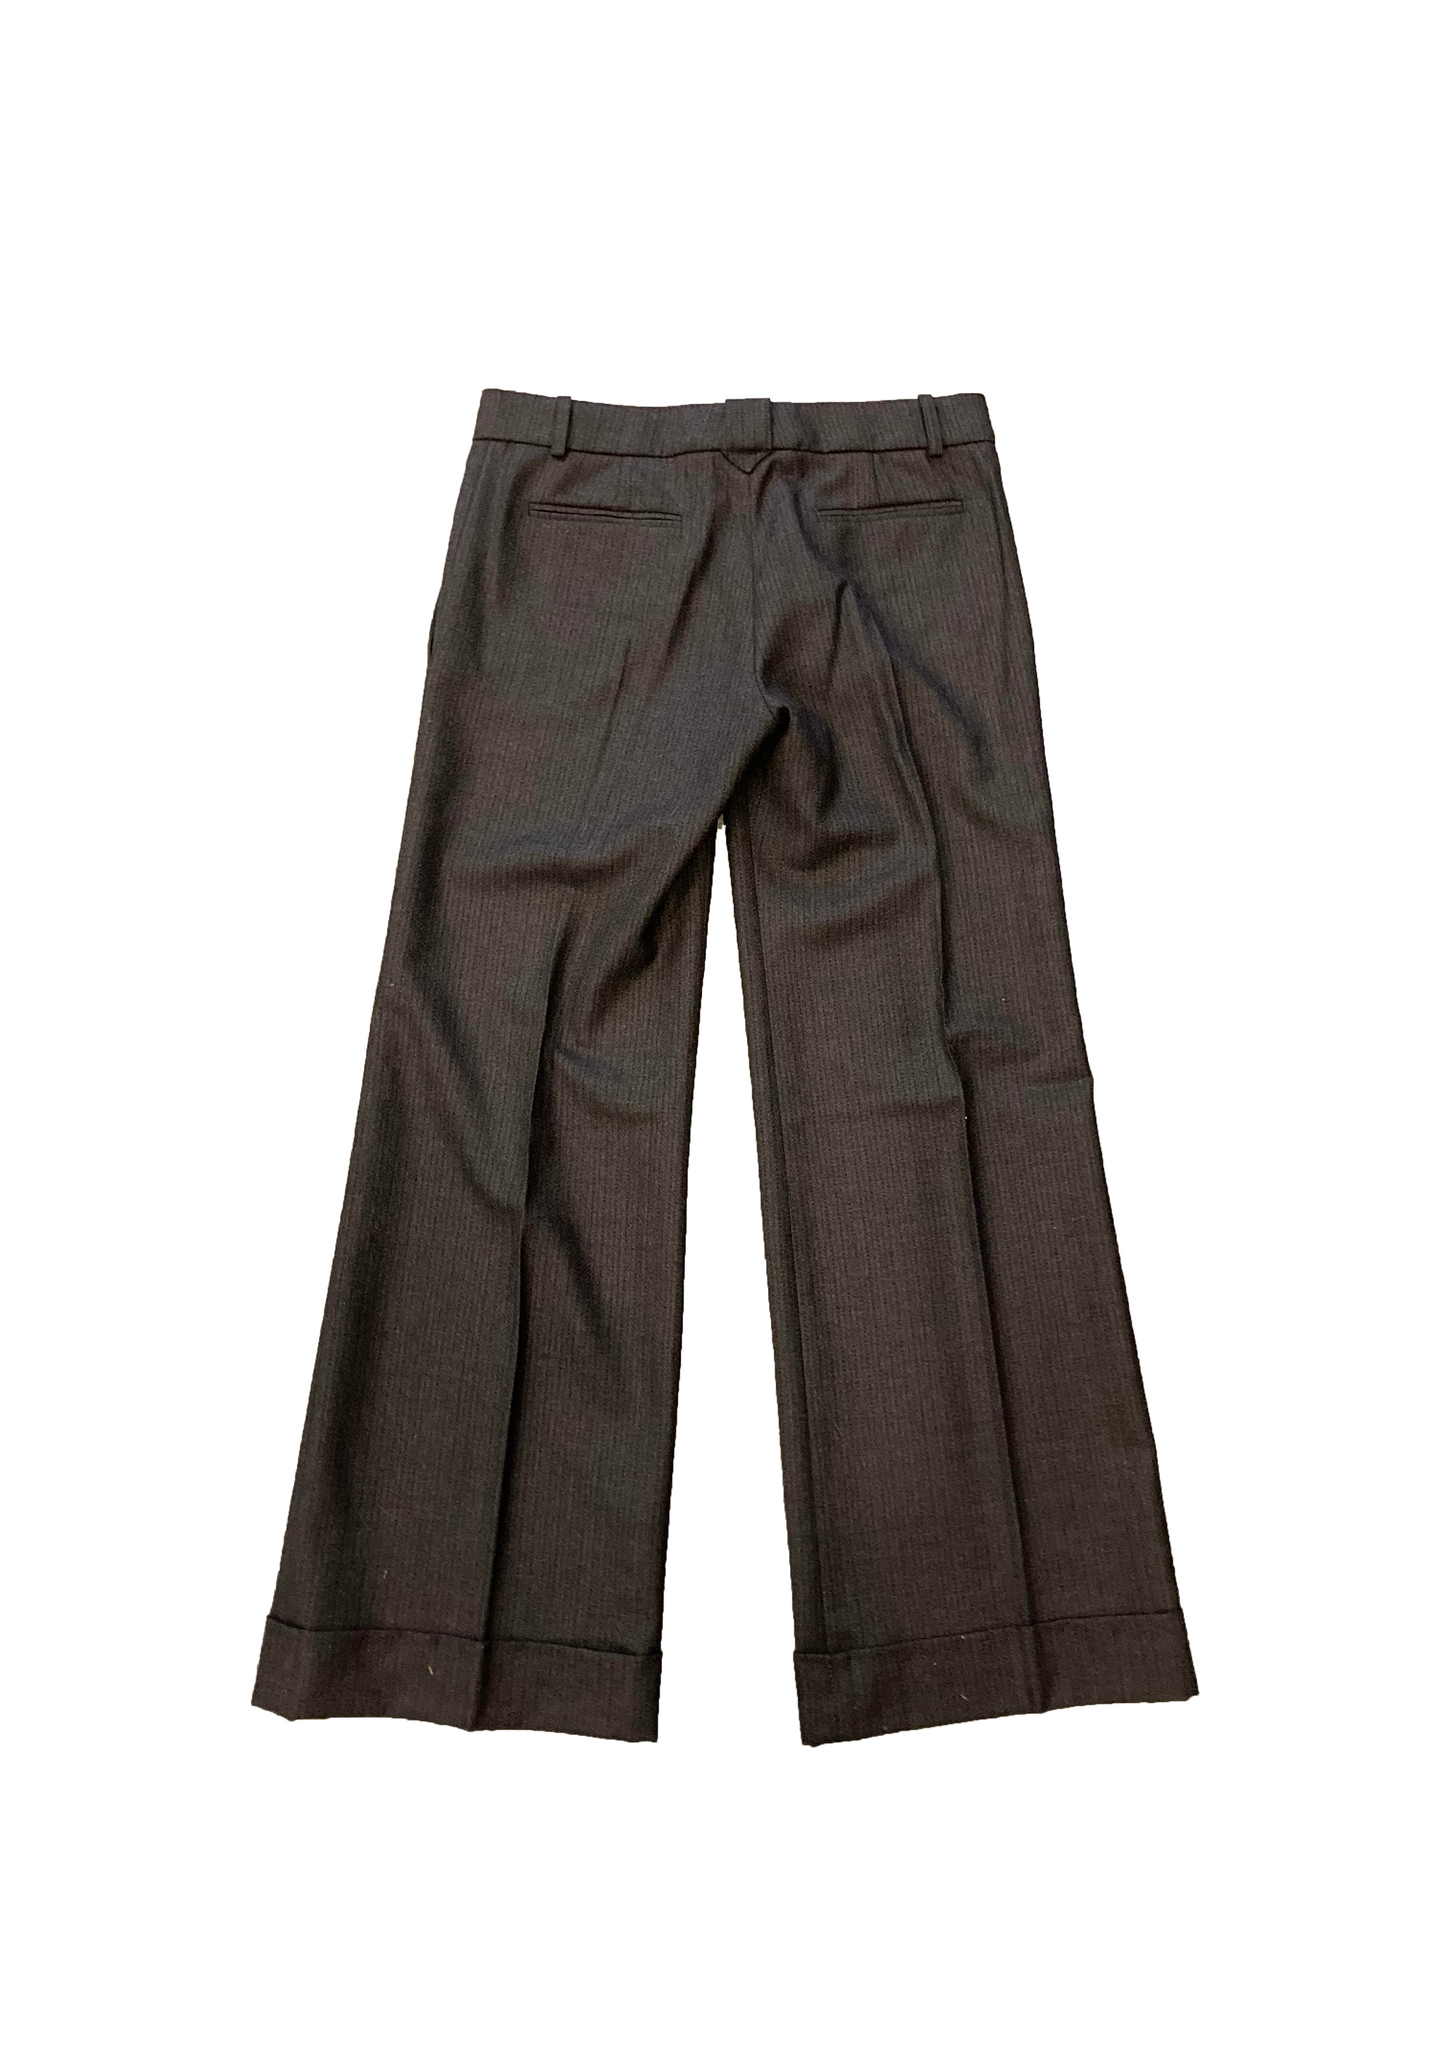 Wool/Cashmere Mix Trousers